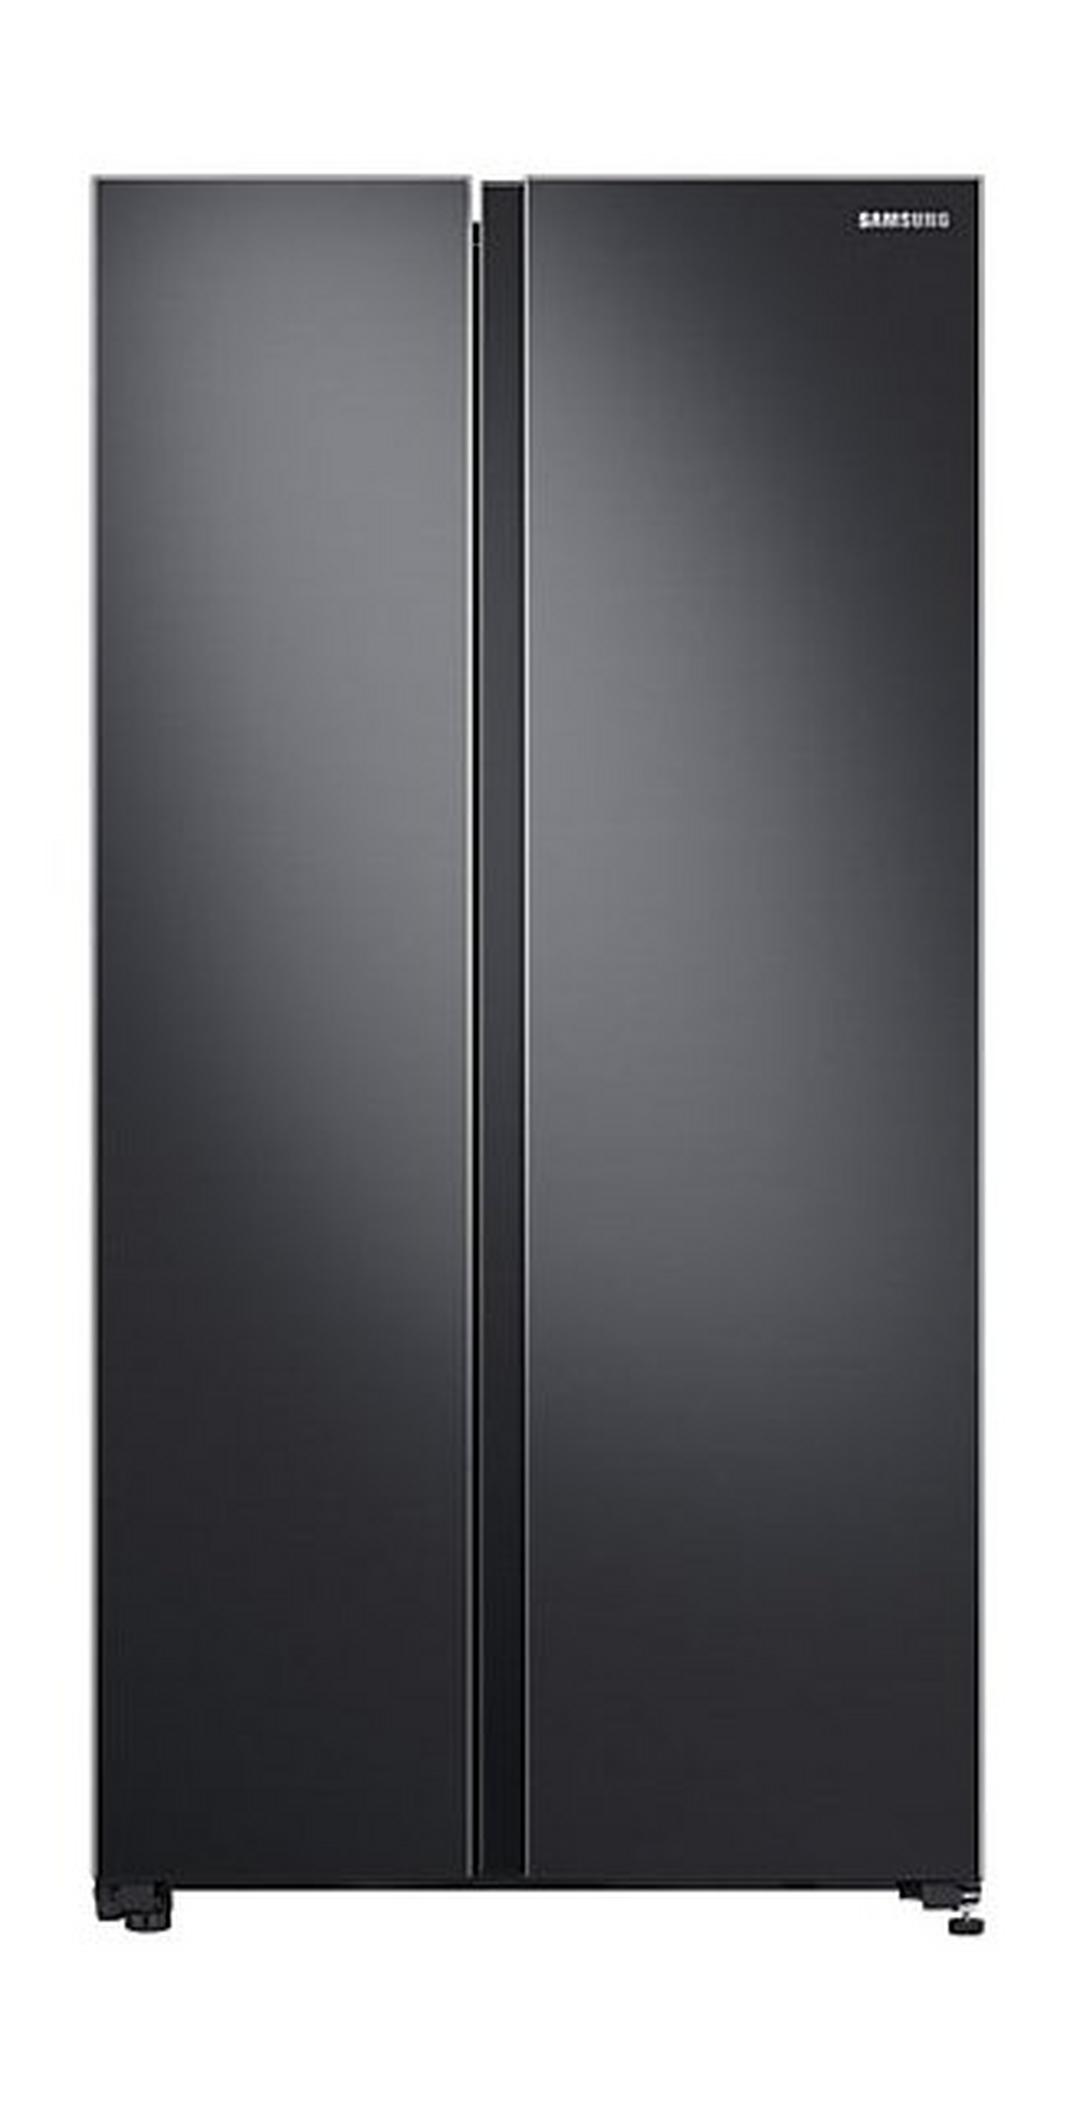 Samsung Side By Side, 23CFT, 647-Liters, RS62R5001B4 - Silver